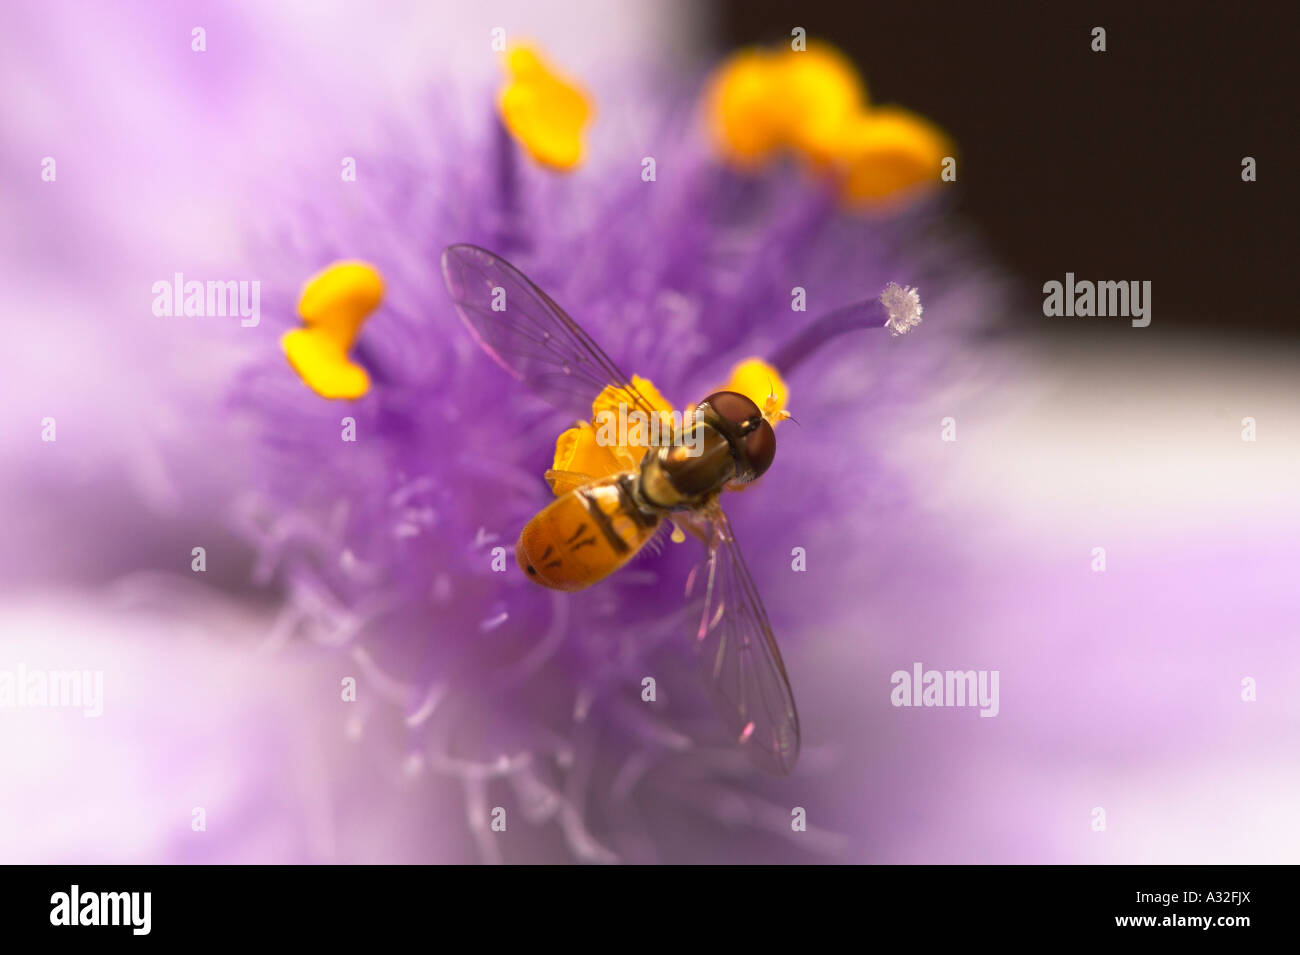 A yellow hoverfly on a violet flower close up Stock Photo